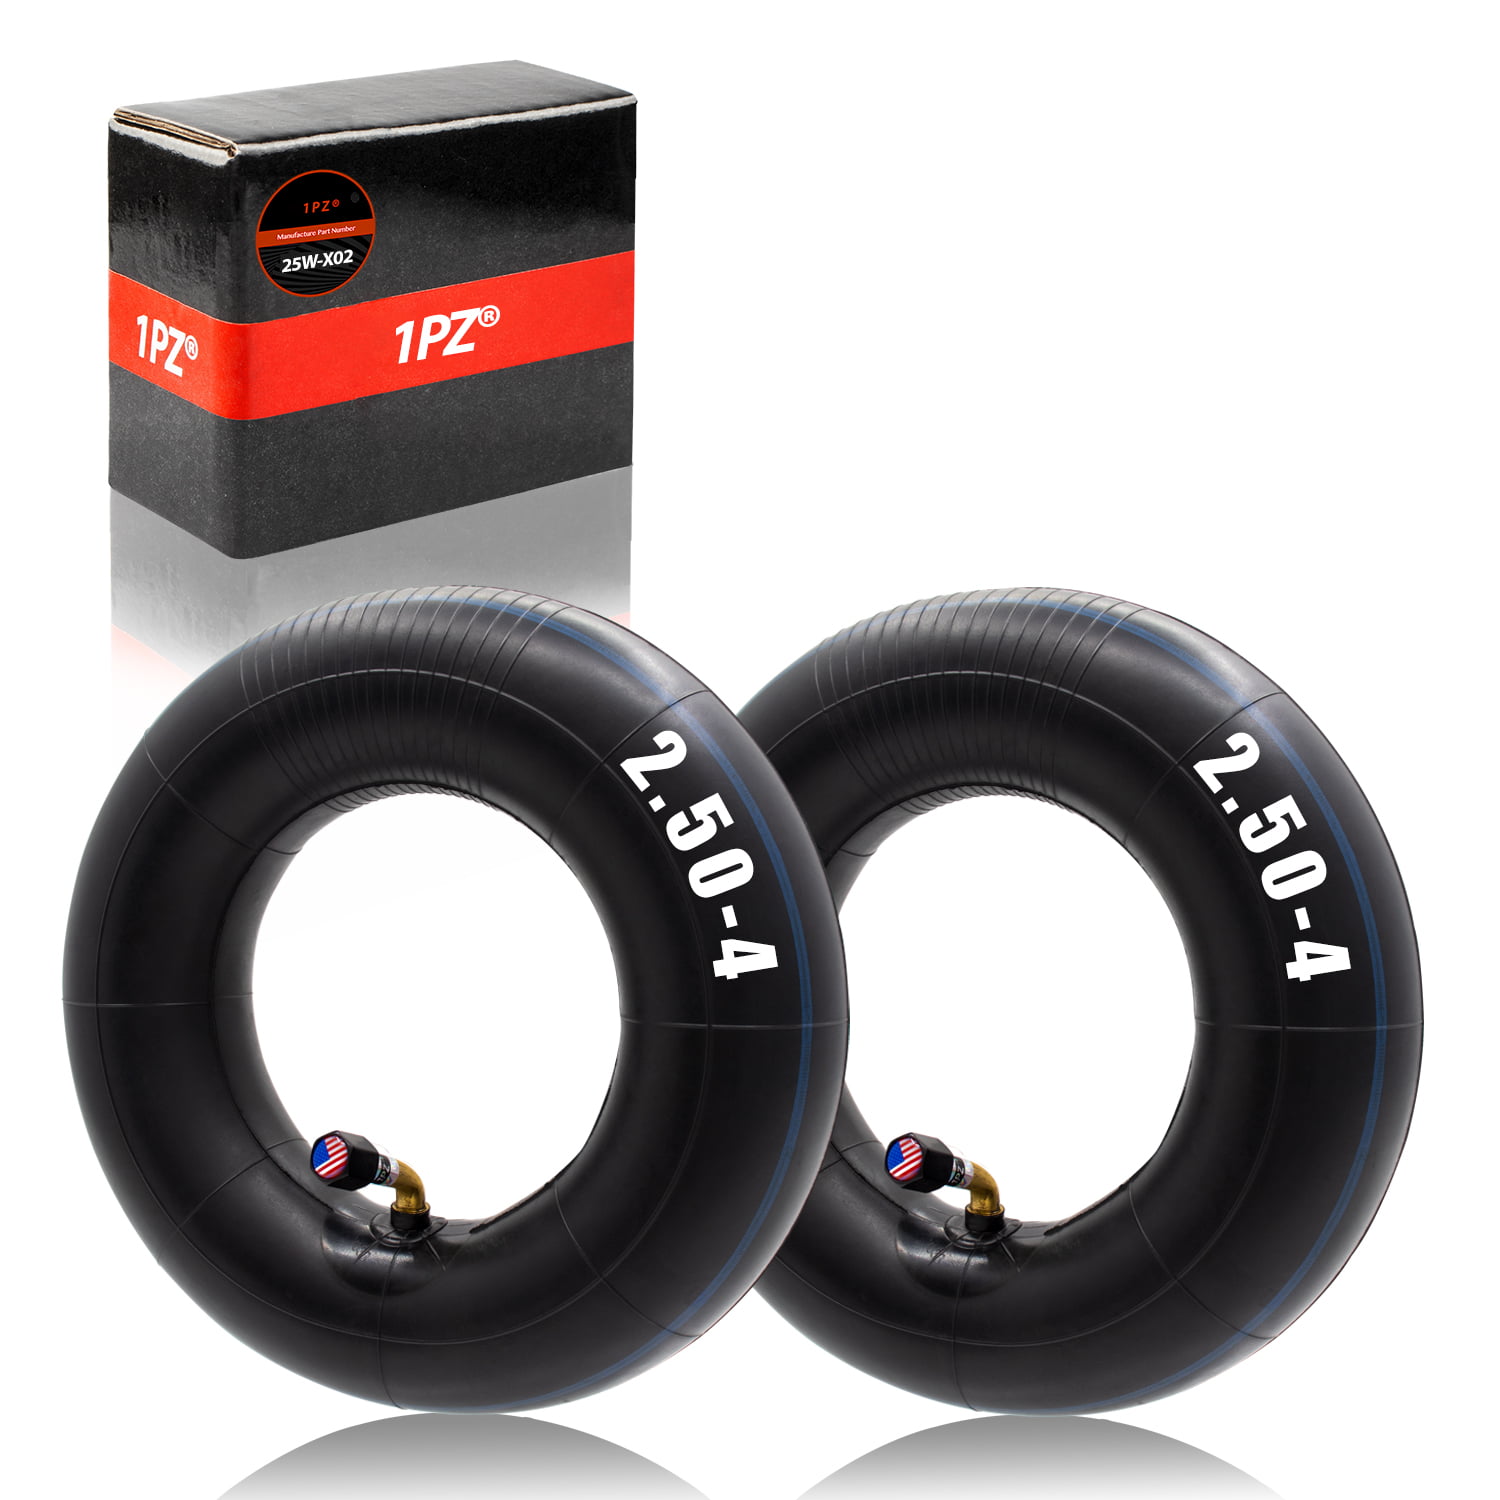 2 Tires & 2 Tub es 280 x 250 x 4"  For Scooters-Mowers 